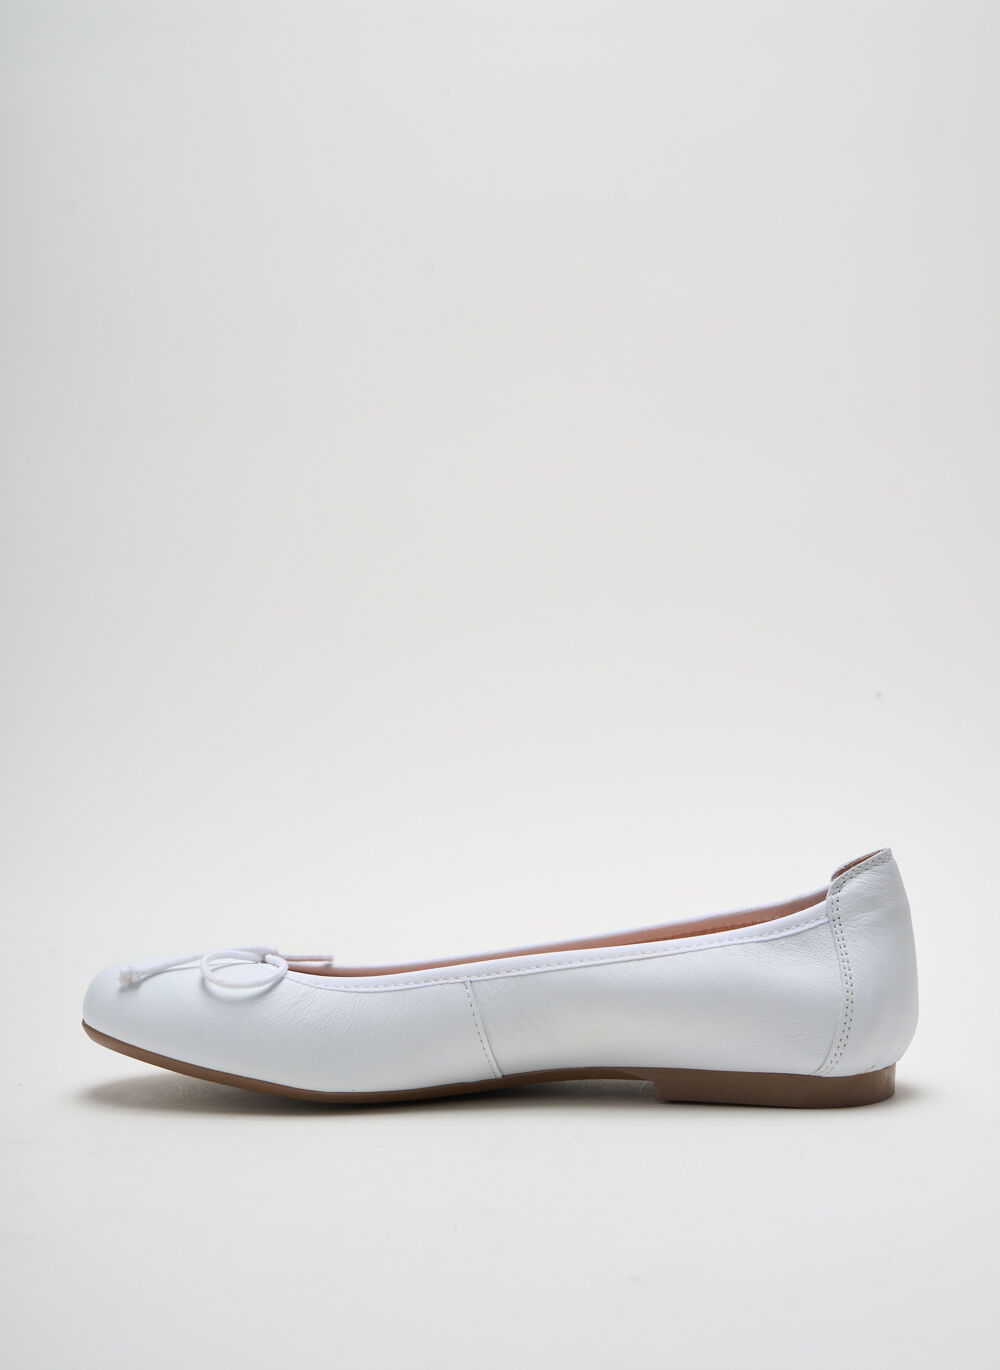 Ballerines fille Acebos blanc taille : 38 Vtements